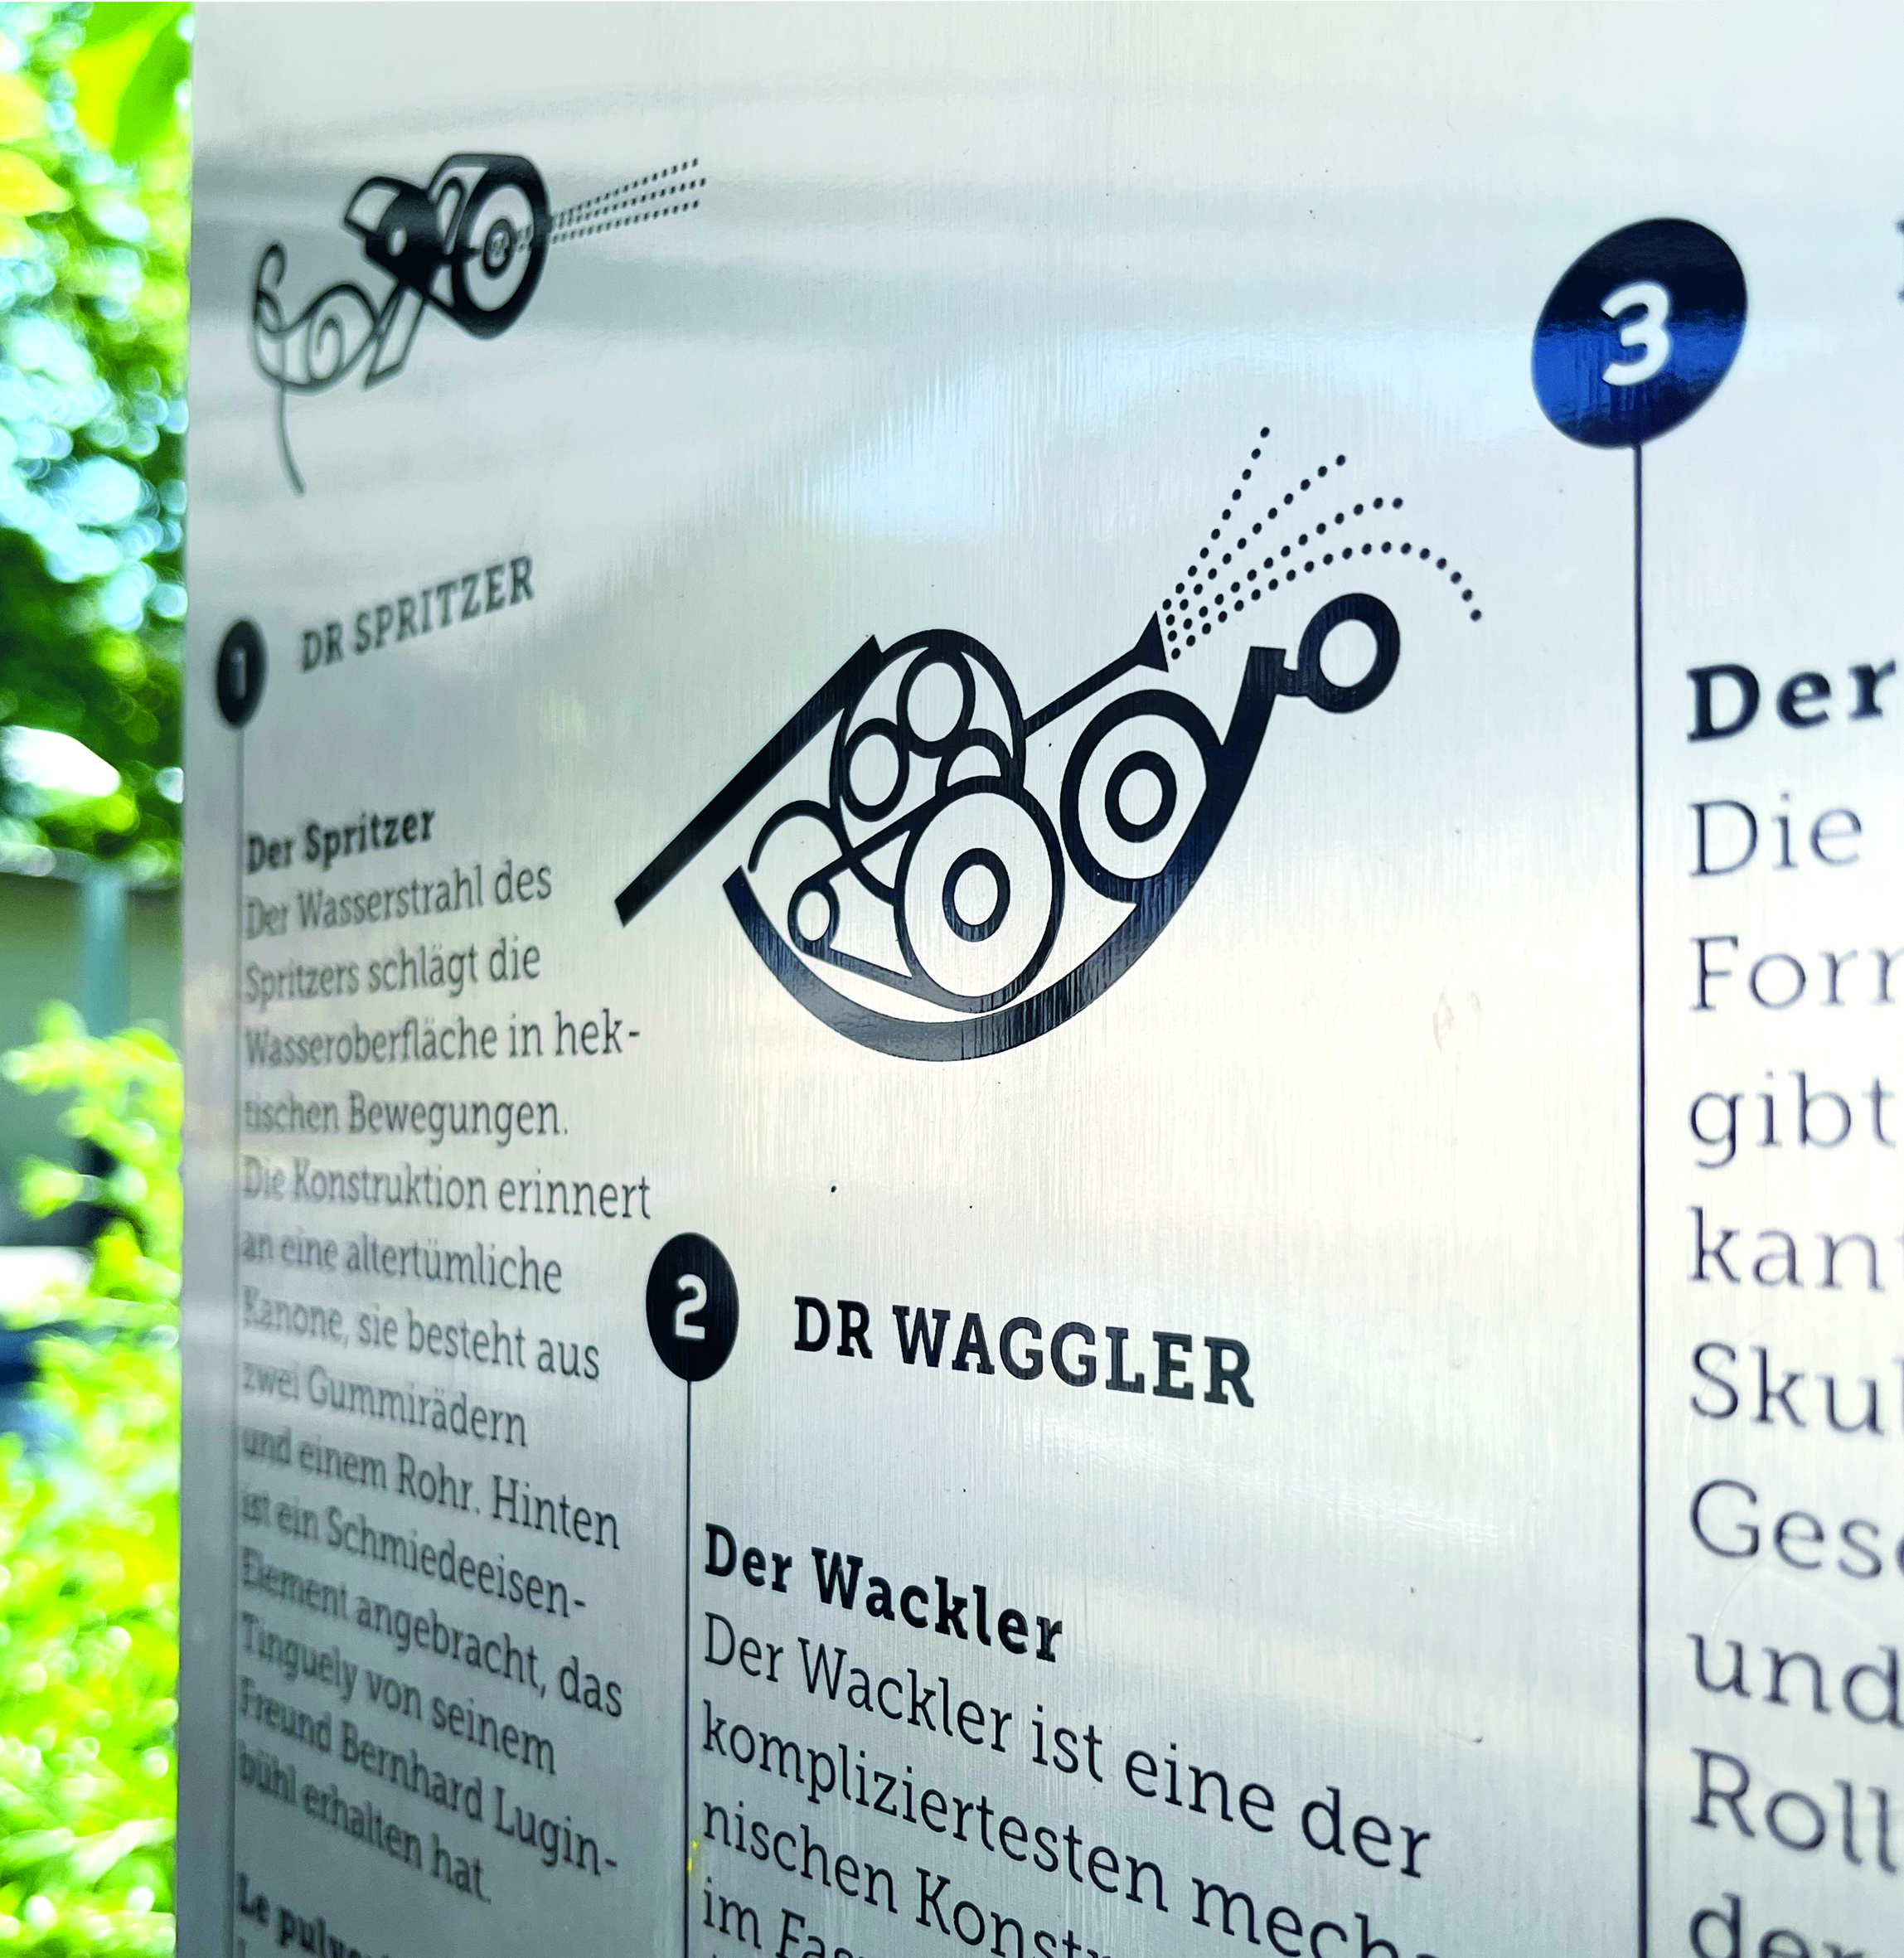 https://sarahweishaupt.ch/media/pages/home/illustrationen-schild-fasnachtsbrunnen-museum-tinguely-basel/079d3407ec-1685531159/img_5102.jpg